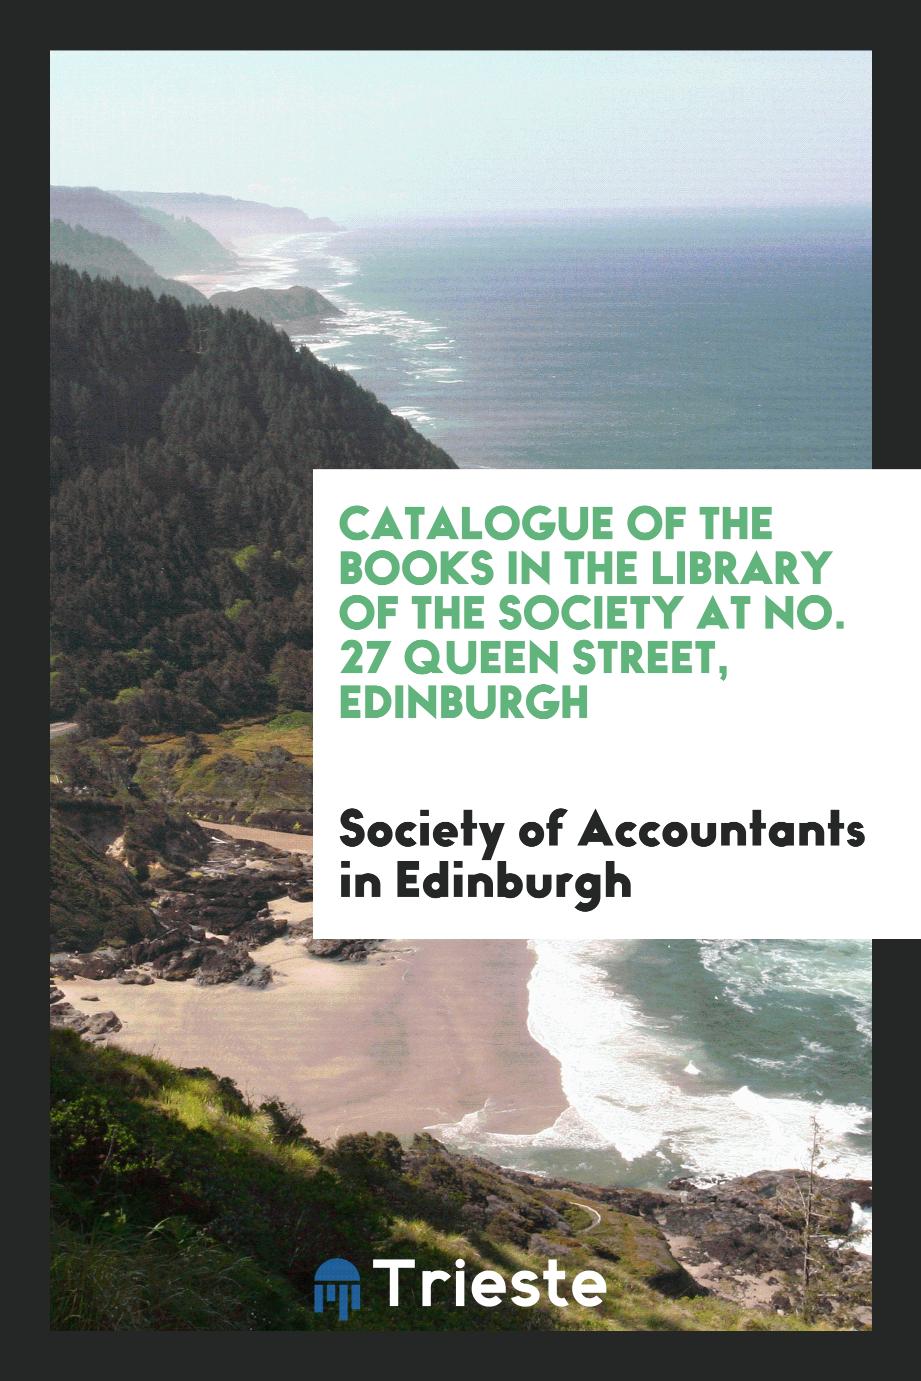 Catalogue of the Books in the Library of the Society at No. 27 Queen Street, Edinburgh